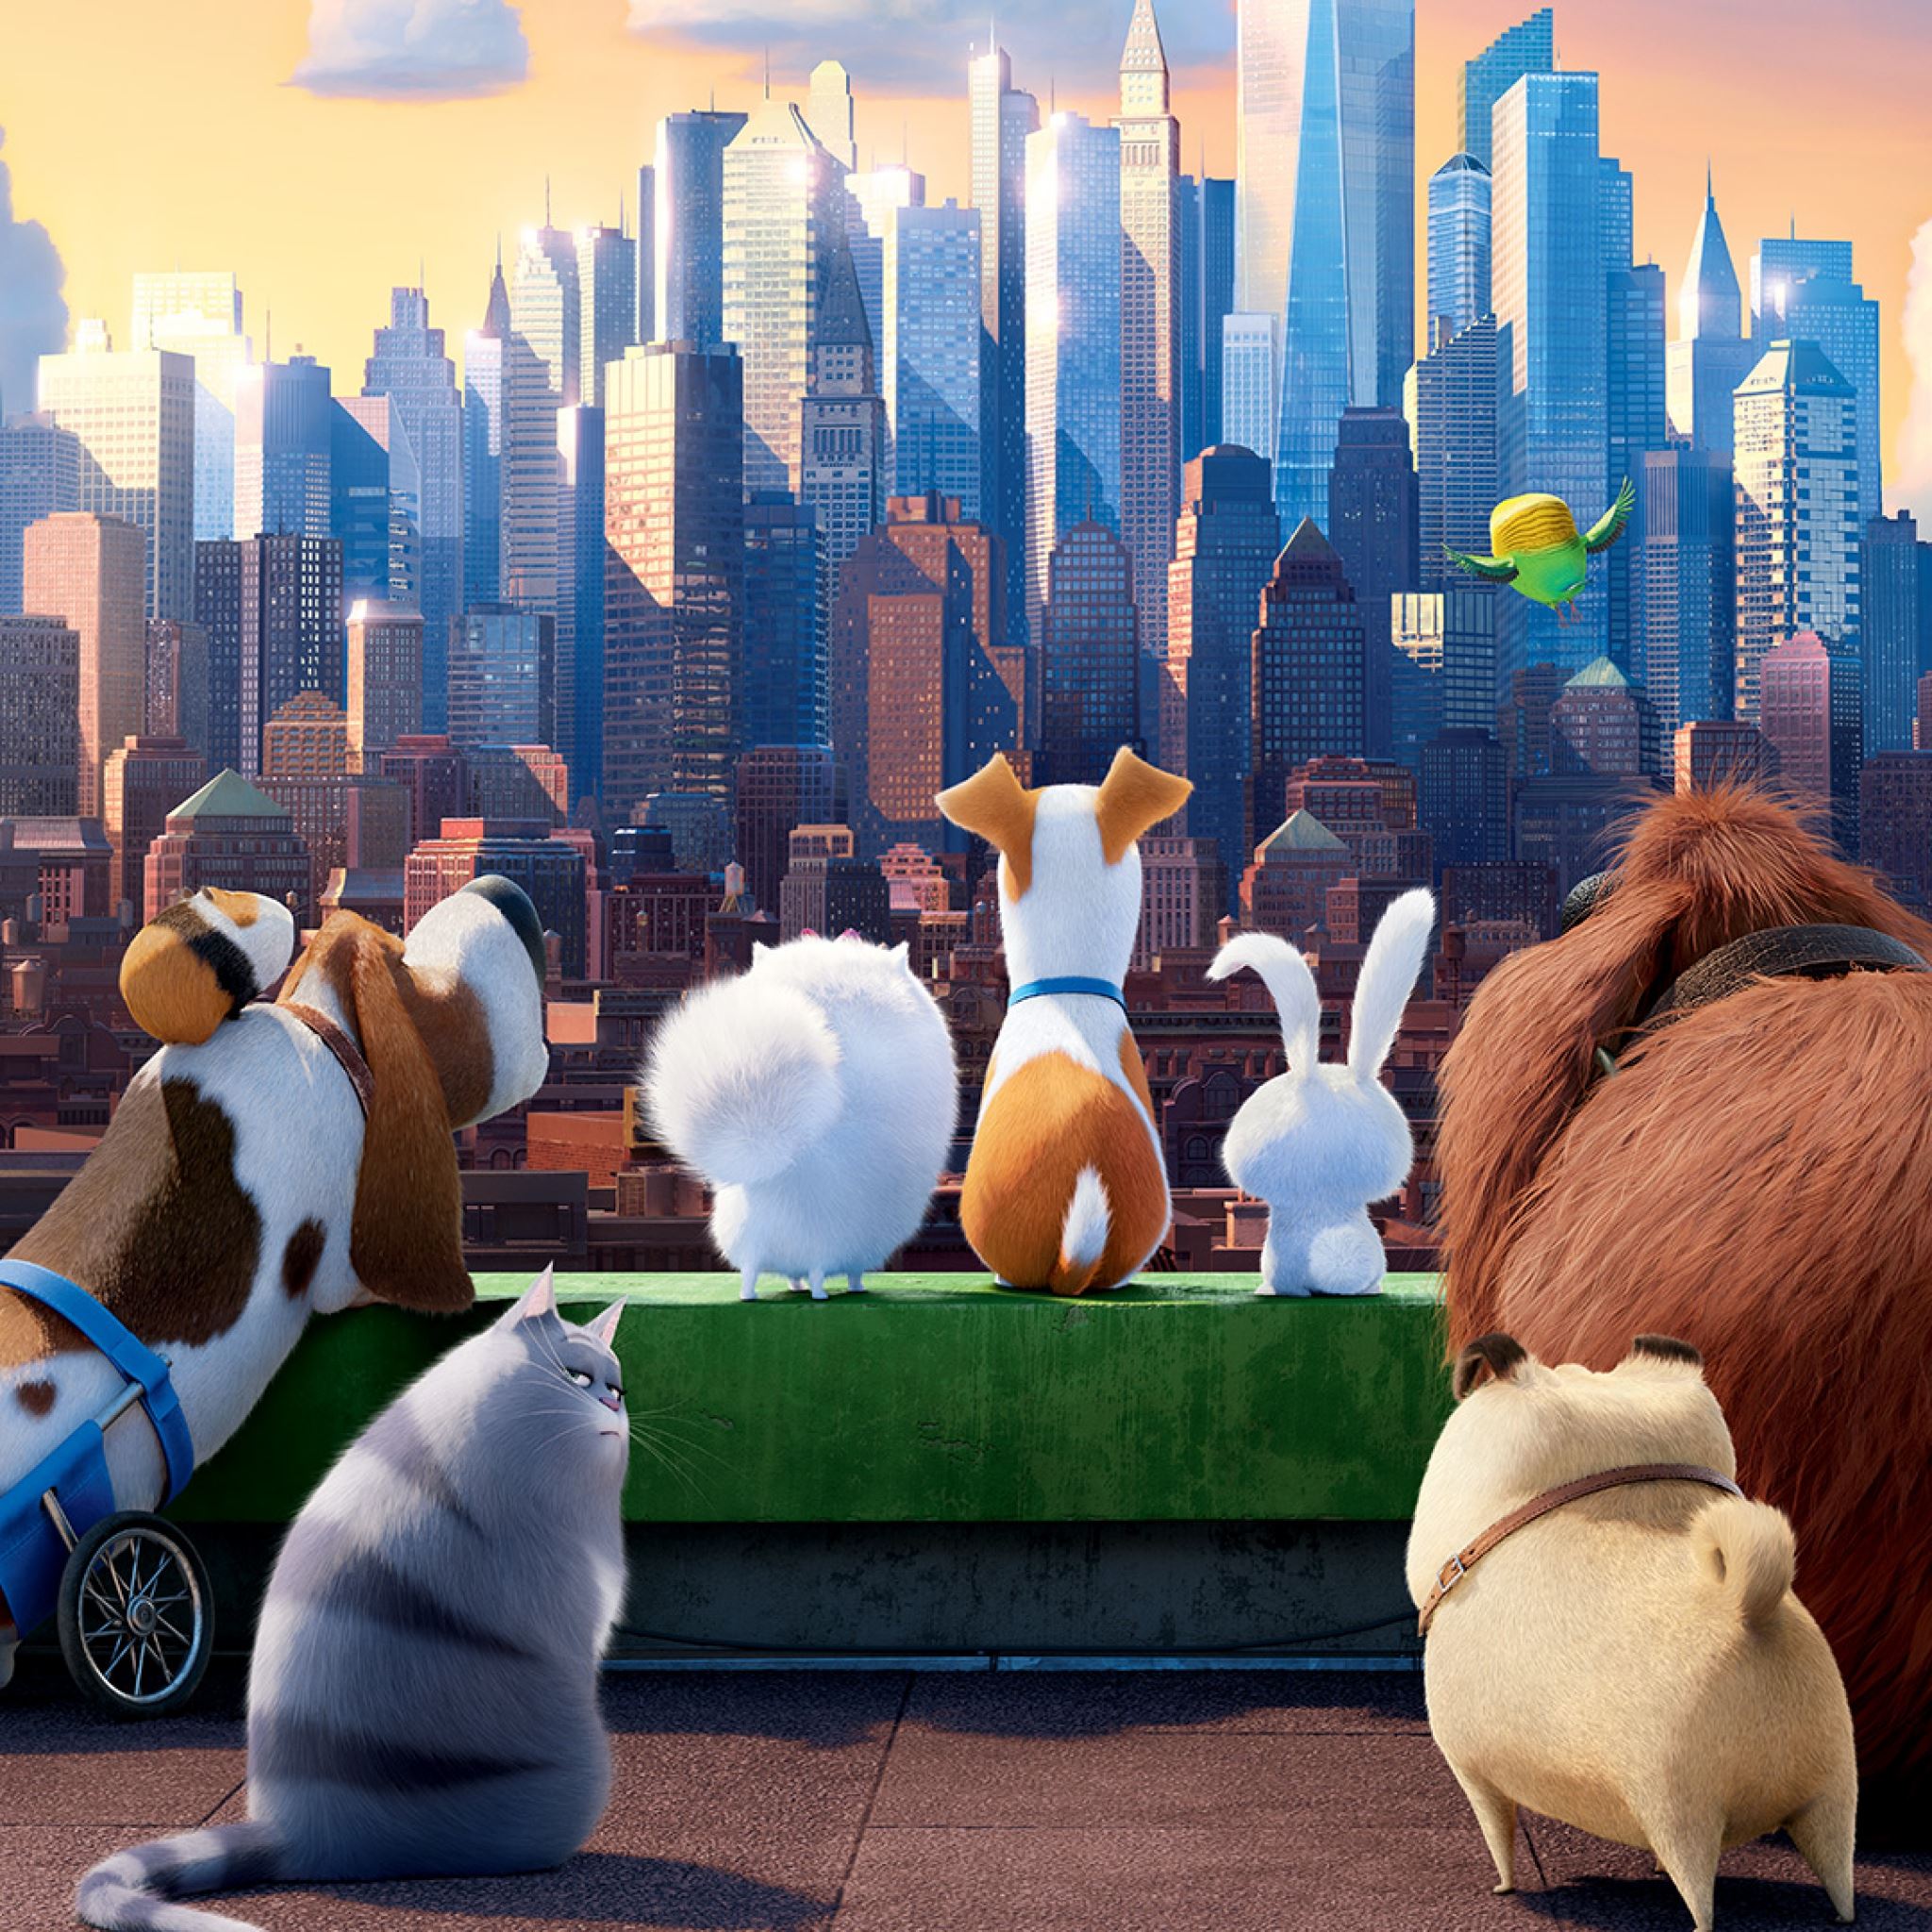 how long is secret life of pets movie